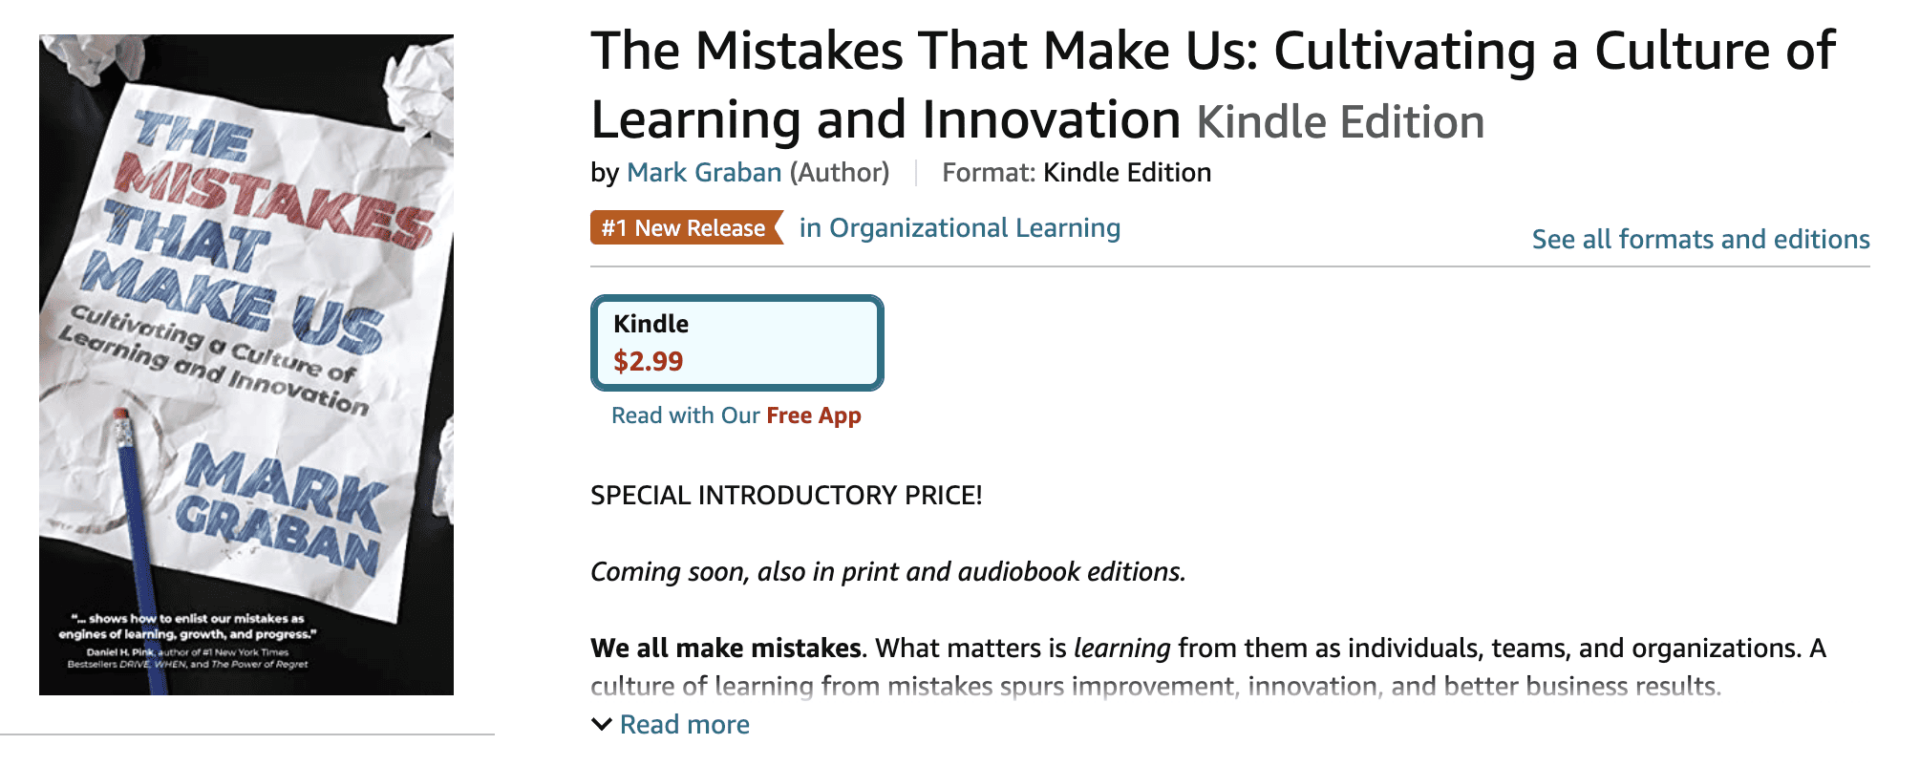 The Mistakes That Make Us: Cultivating a Culture of Learning and Innovation Amazon Kindle 